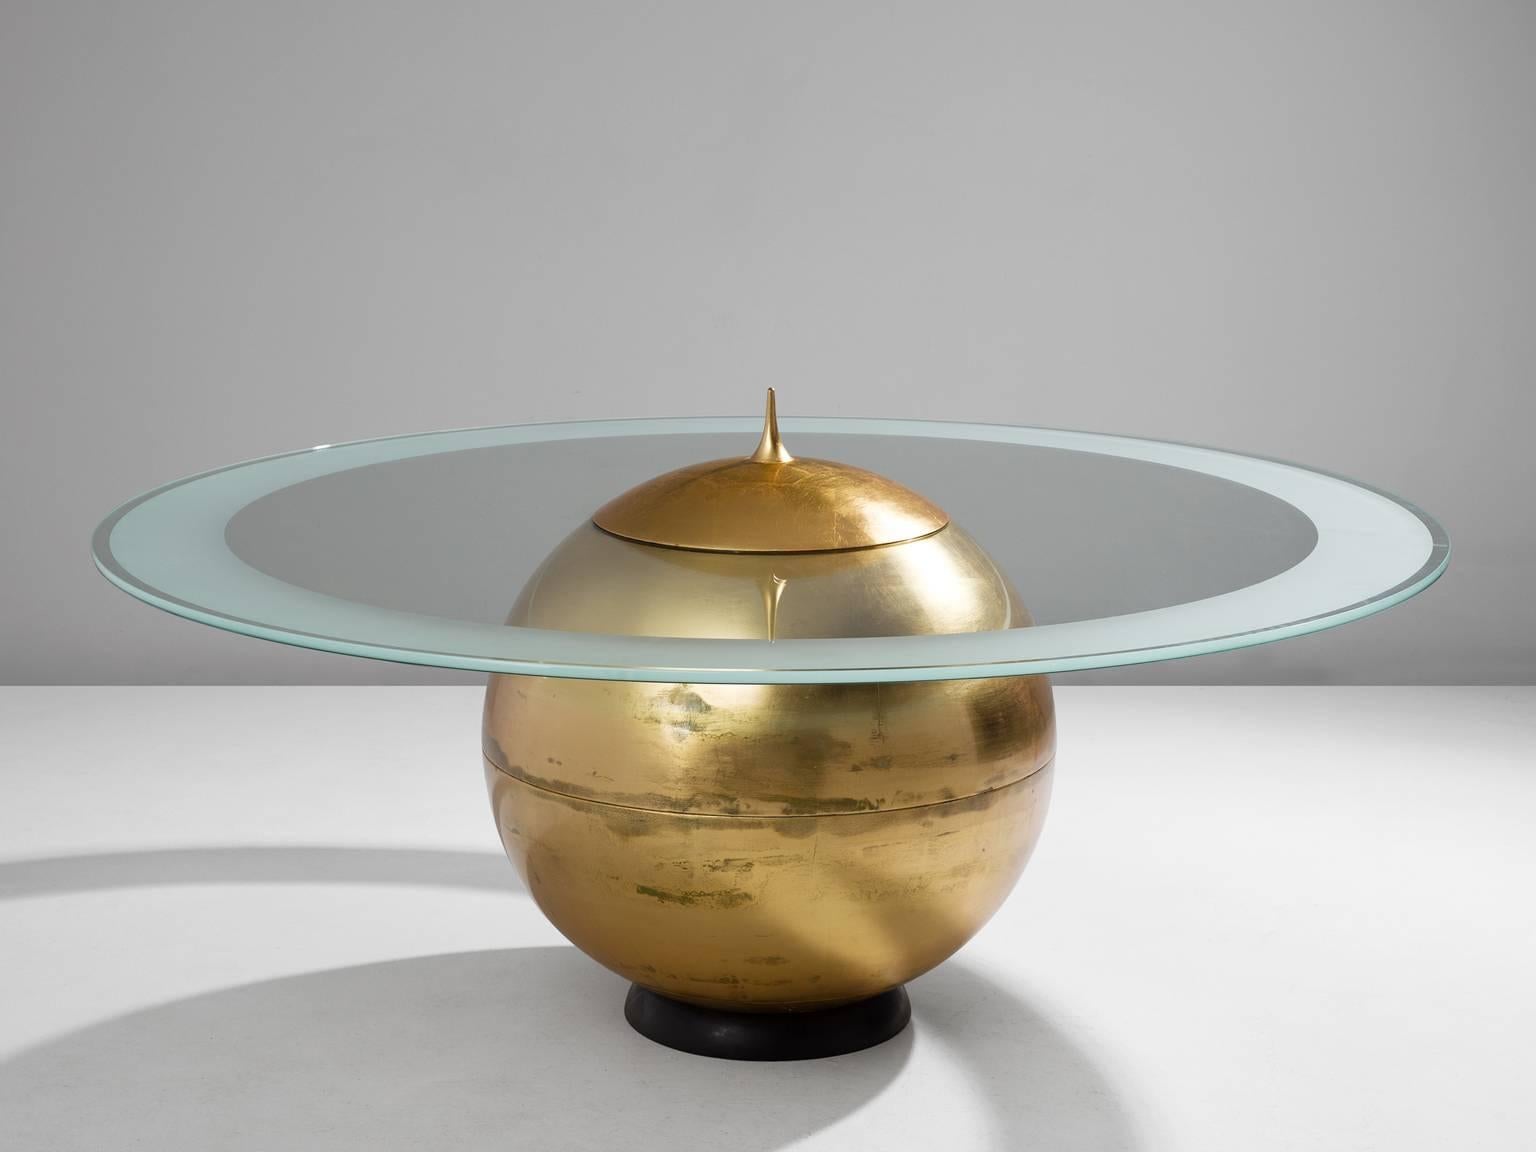 Table 'I Soli', in wood, gold leaf and glass by Alessandro Mendini, Italy, 1985.

Outrageous dining table by Italian designer Alessandro Mendini. Mendini is known for his furniture designs of the post-modern period in Memphis style. The table